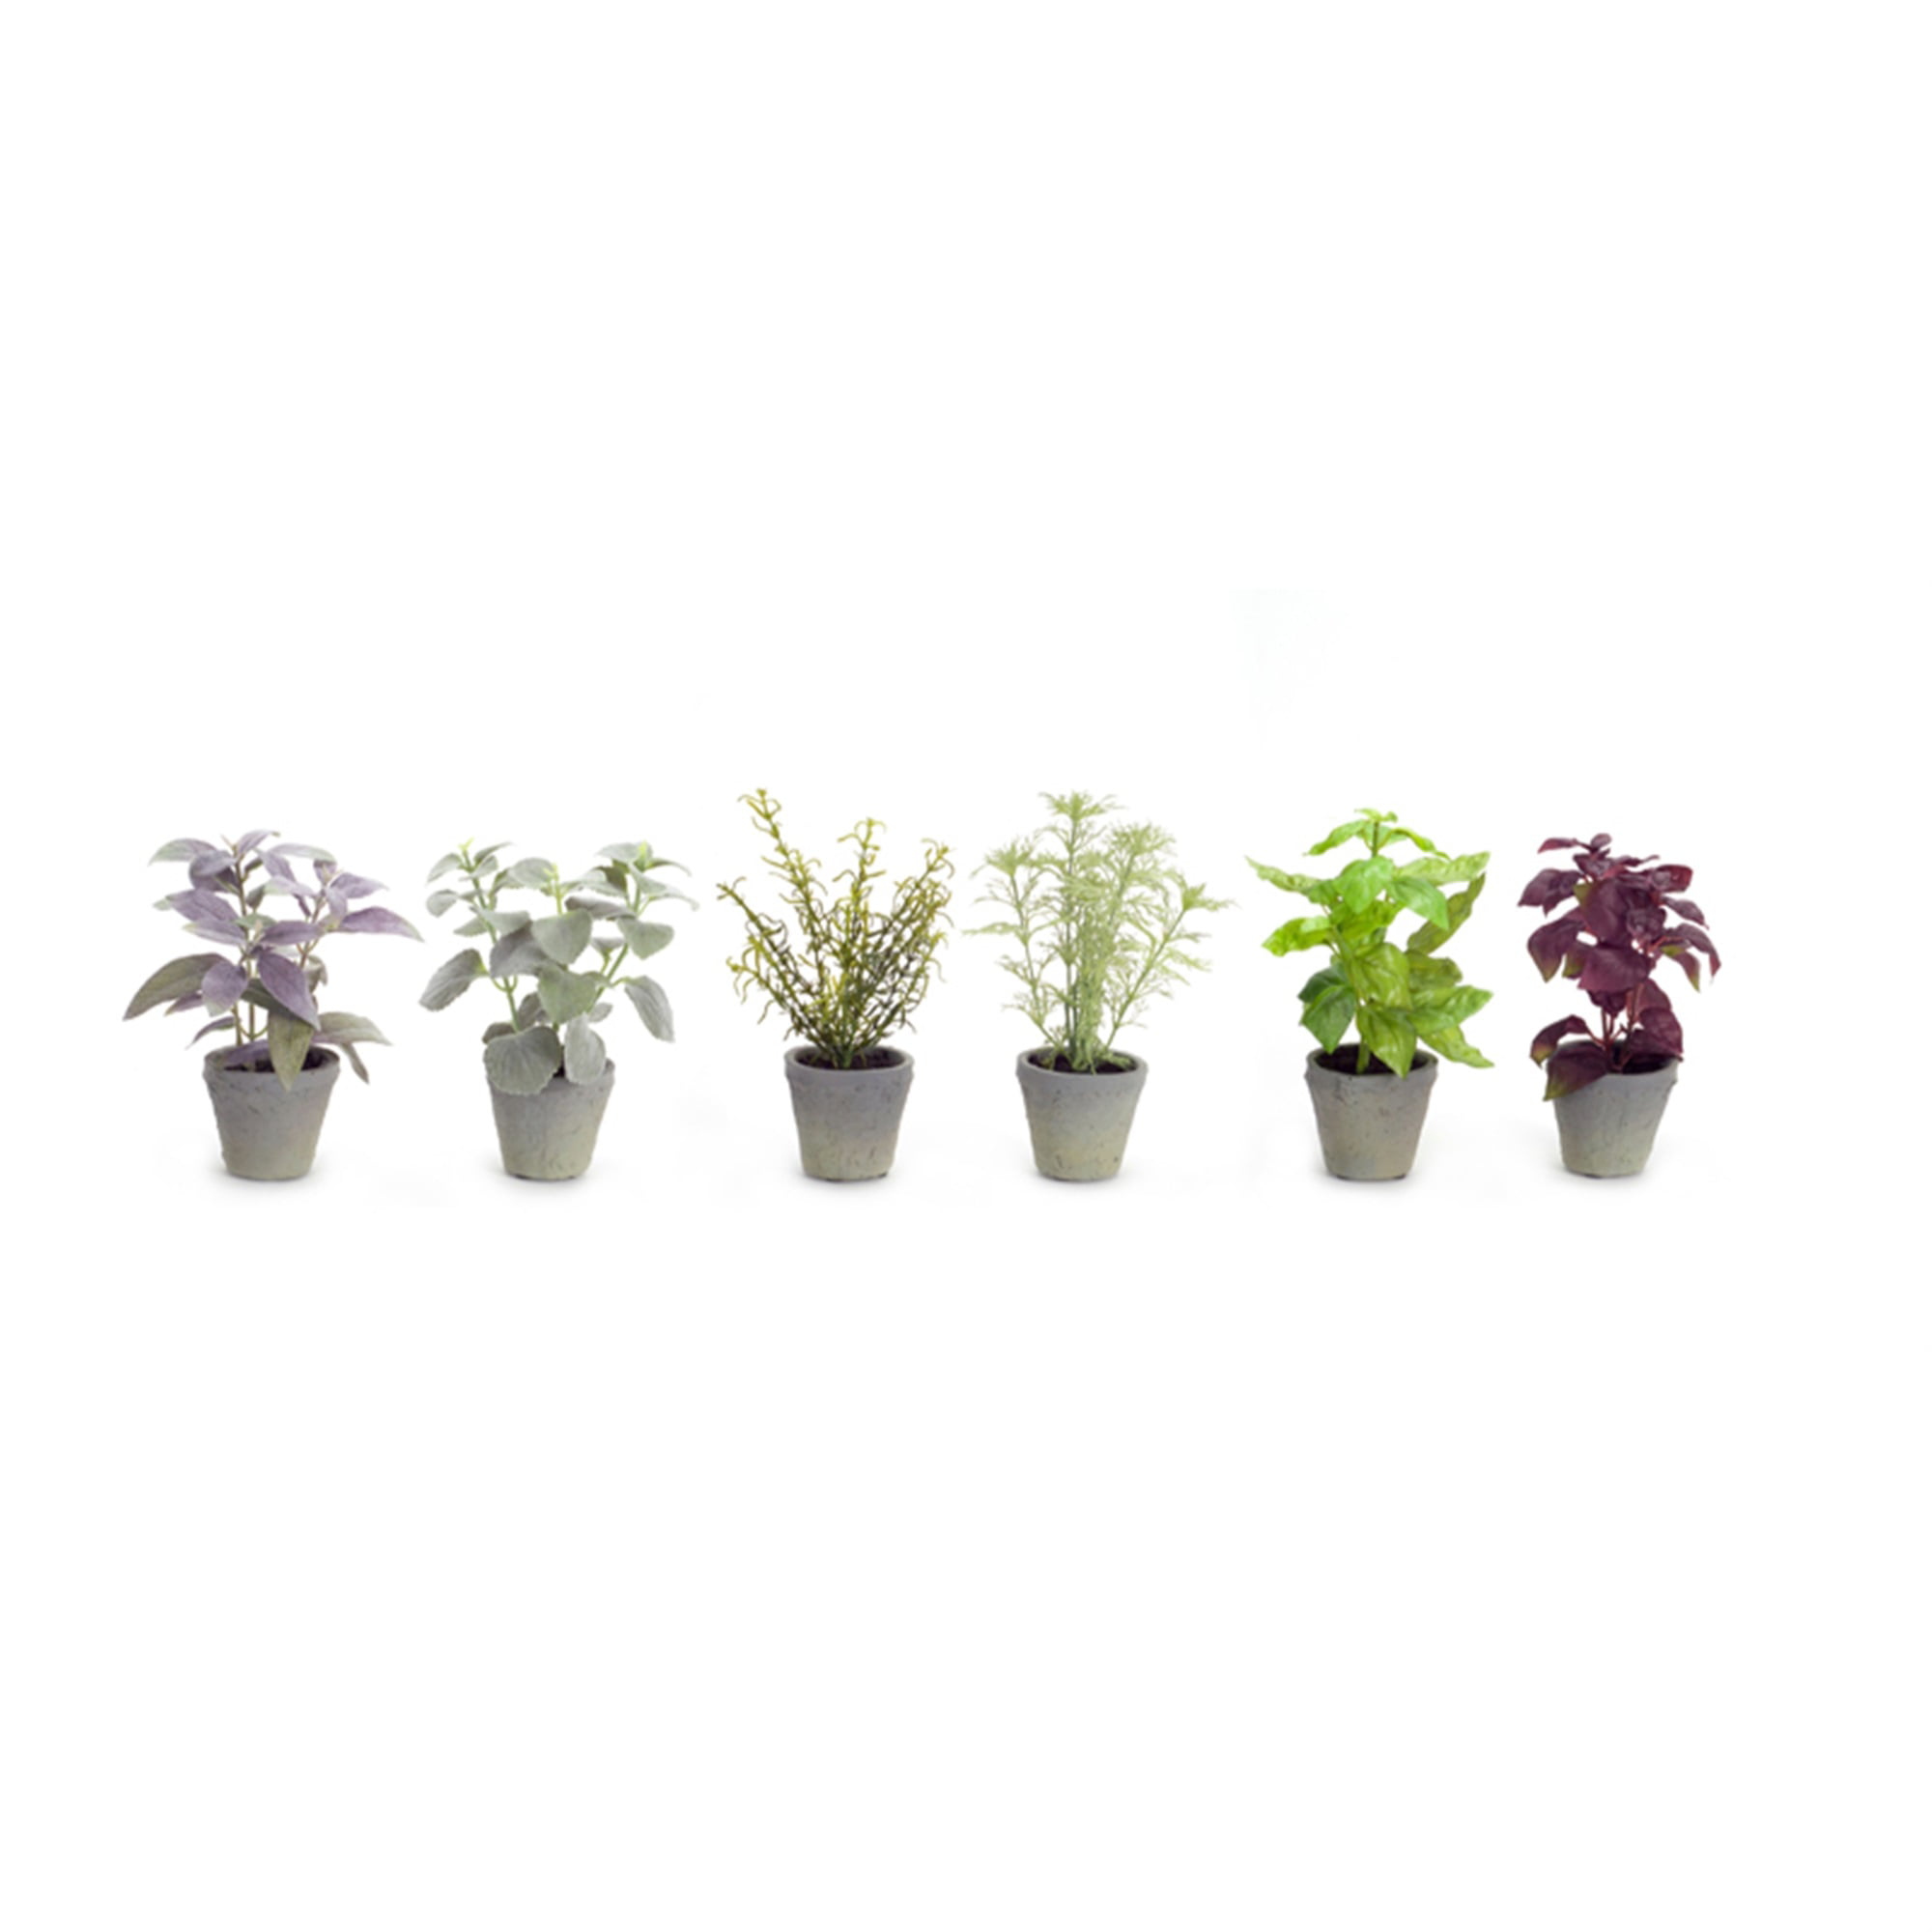 Potted Herb (Set of 12) 7"H Polyester/Plastic